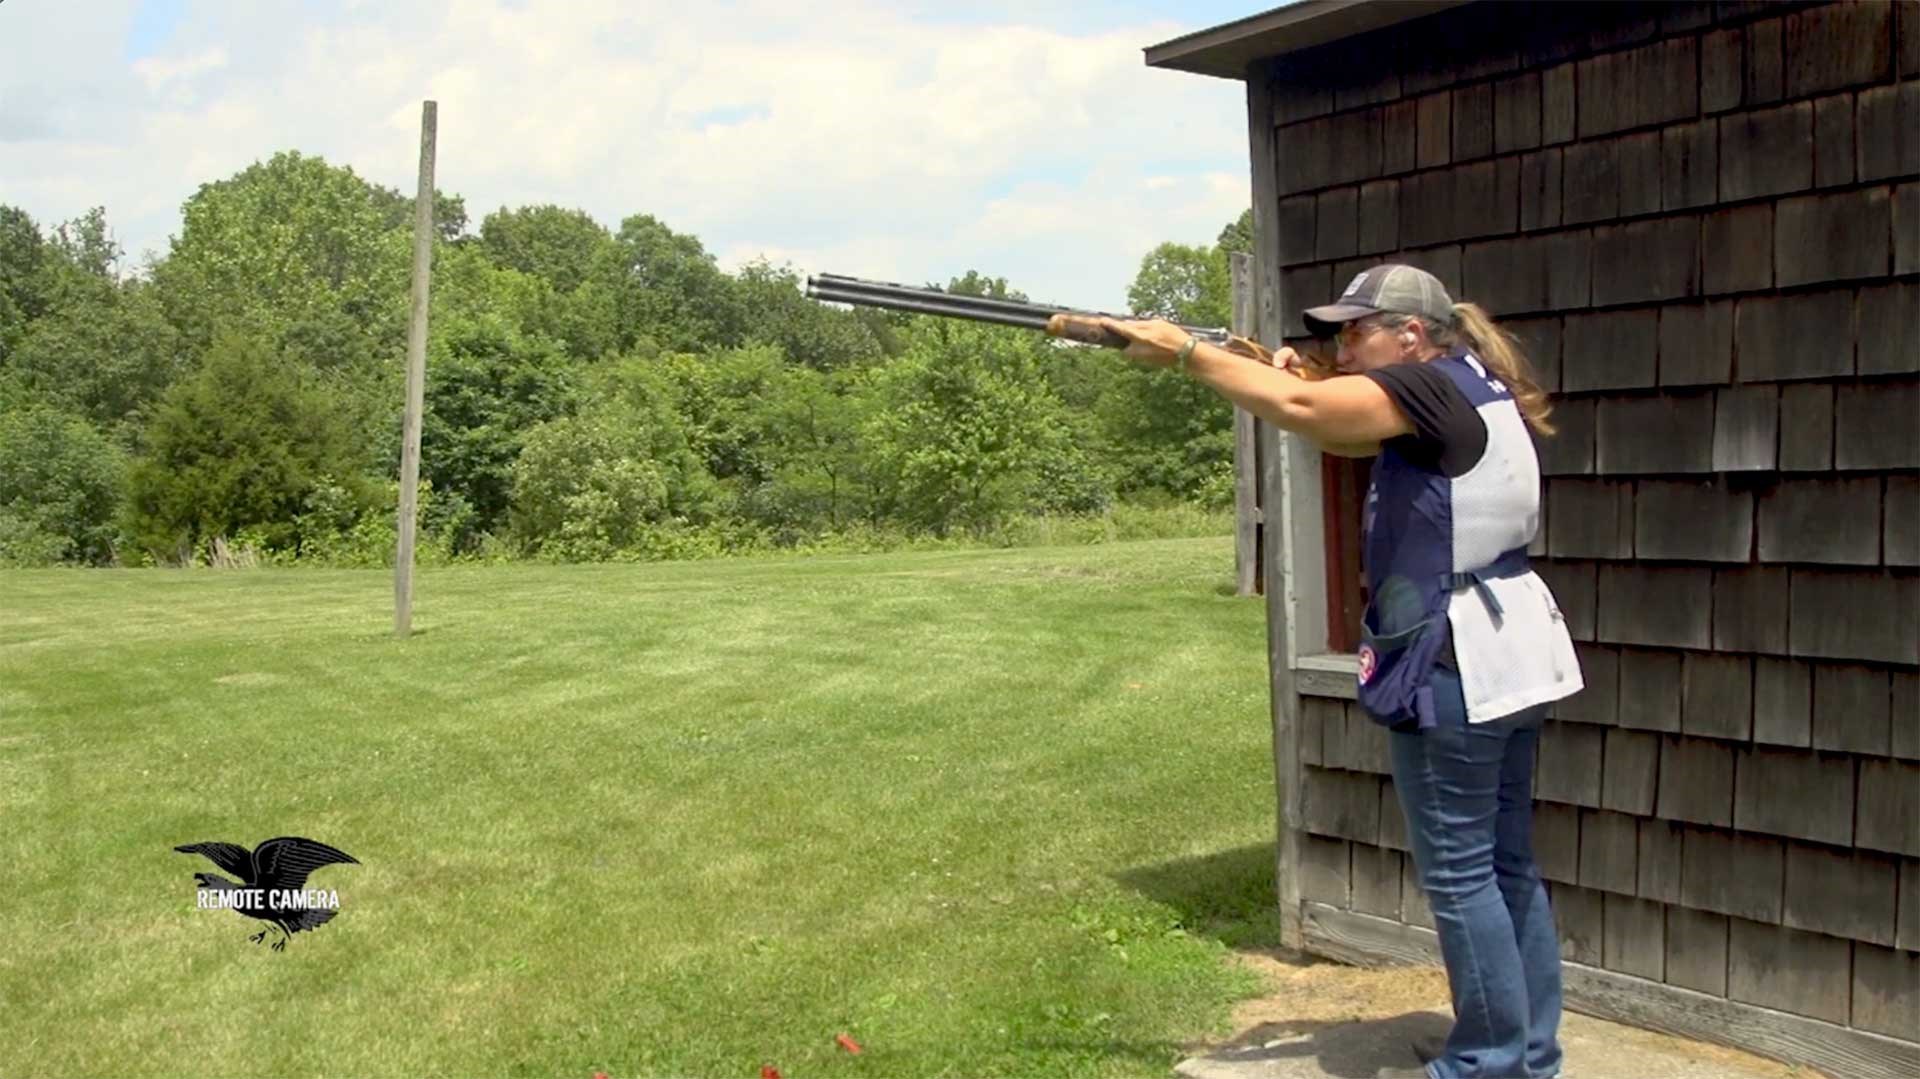 Olympic shooter Kim Rhode aims a shotgun from Position 7 on a skeet range.